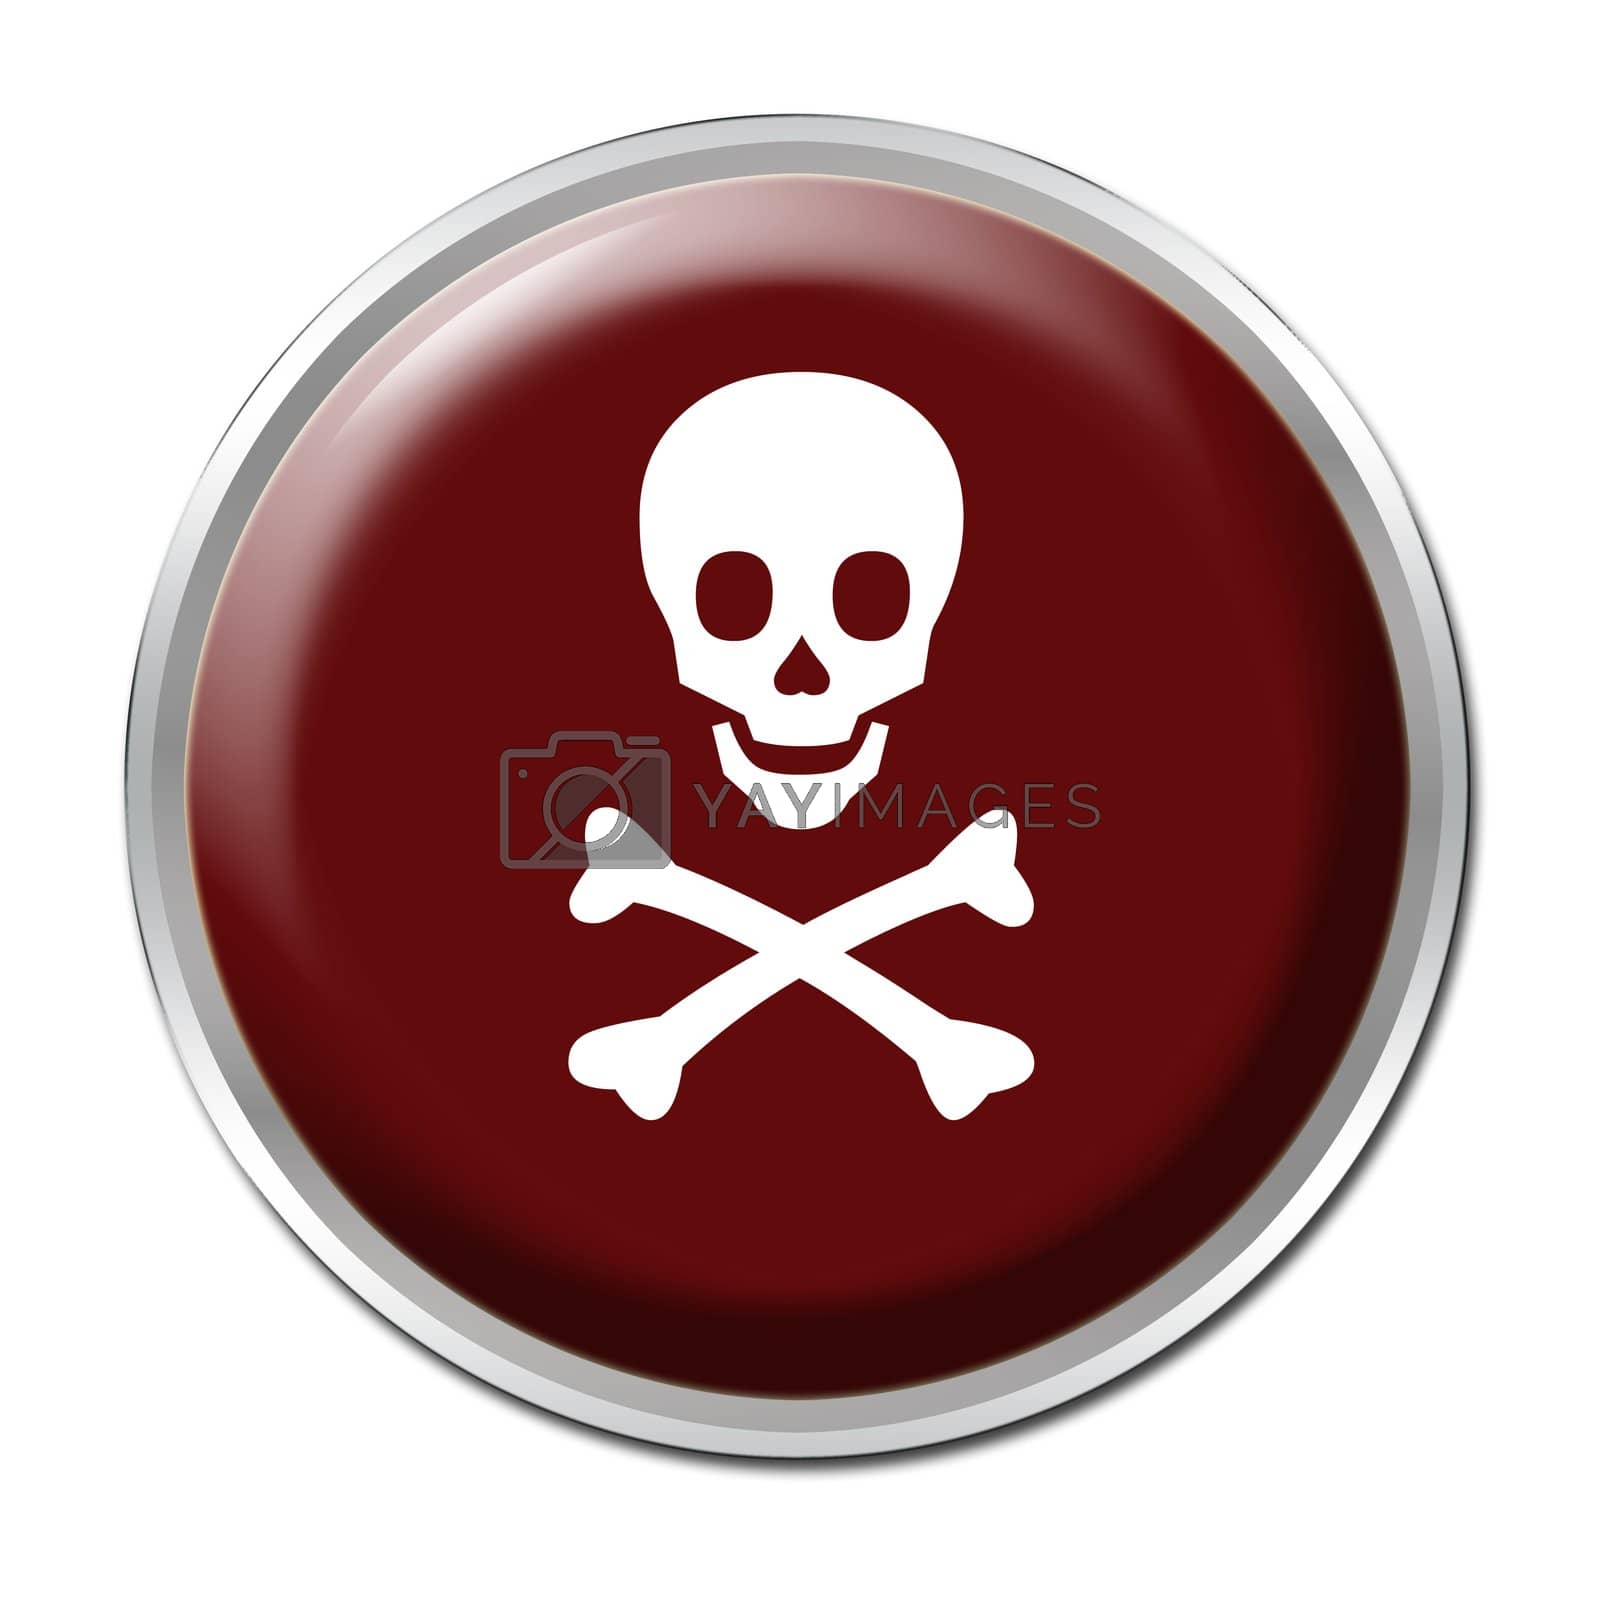 Royalty free image of Skull Button by werg